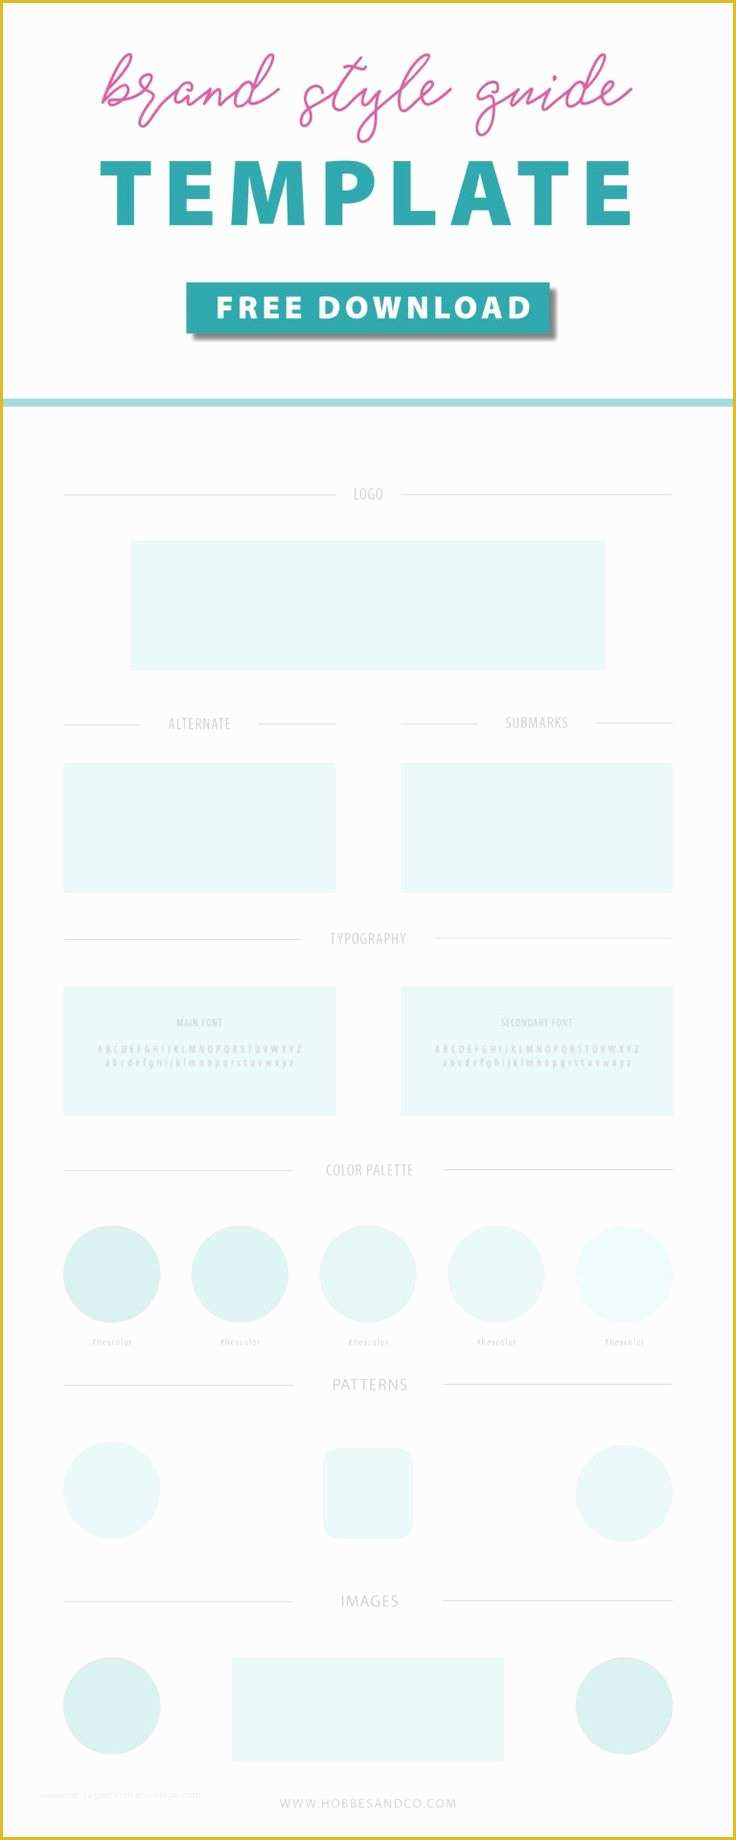 Brand Guidelines Template Indesign Free Of 25 Best Ideas About Brand Guidelines Template On